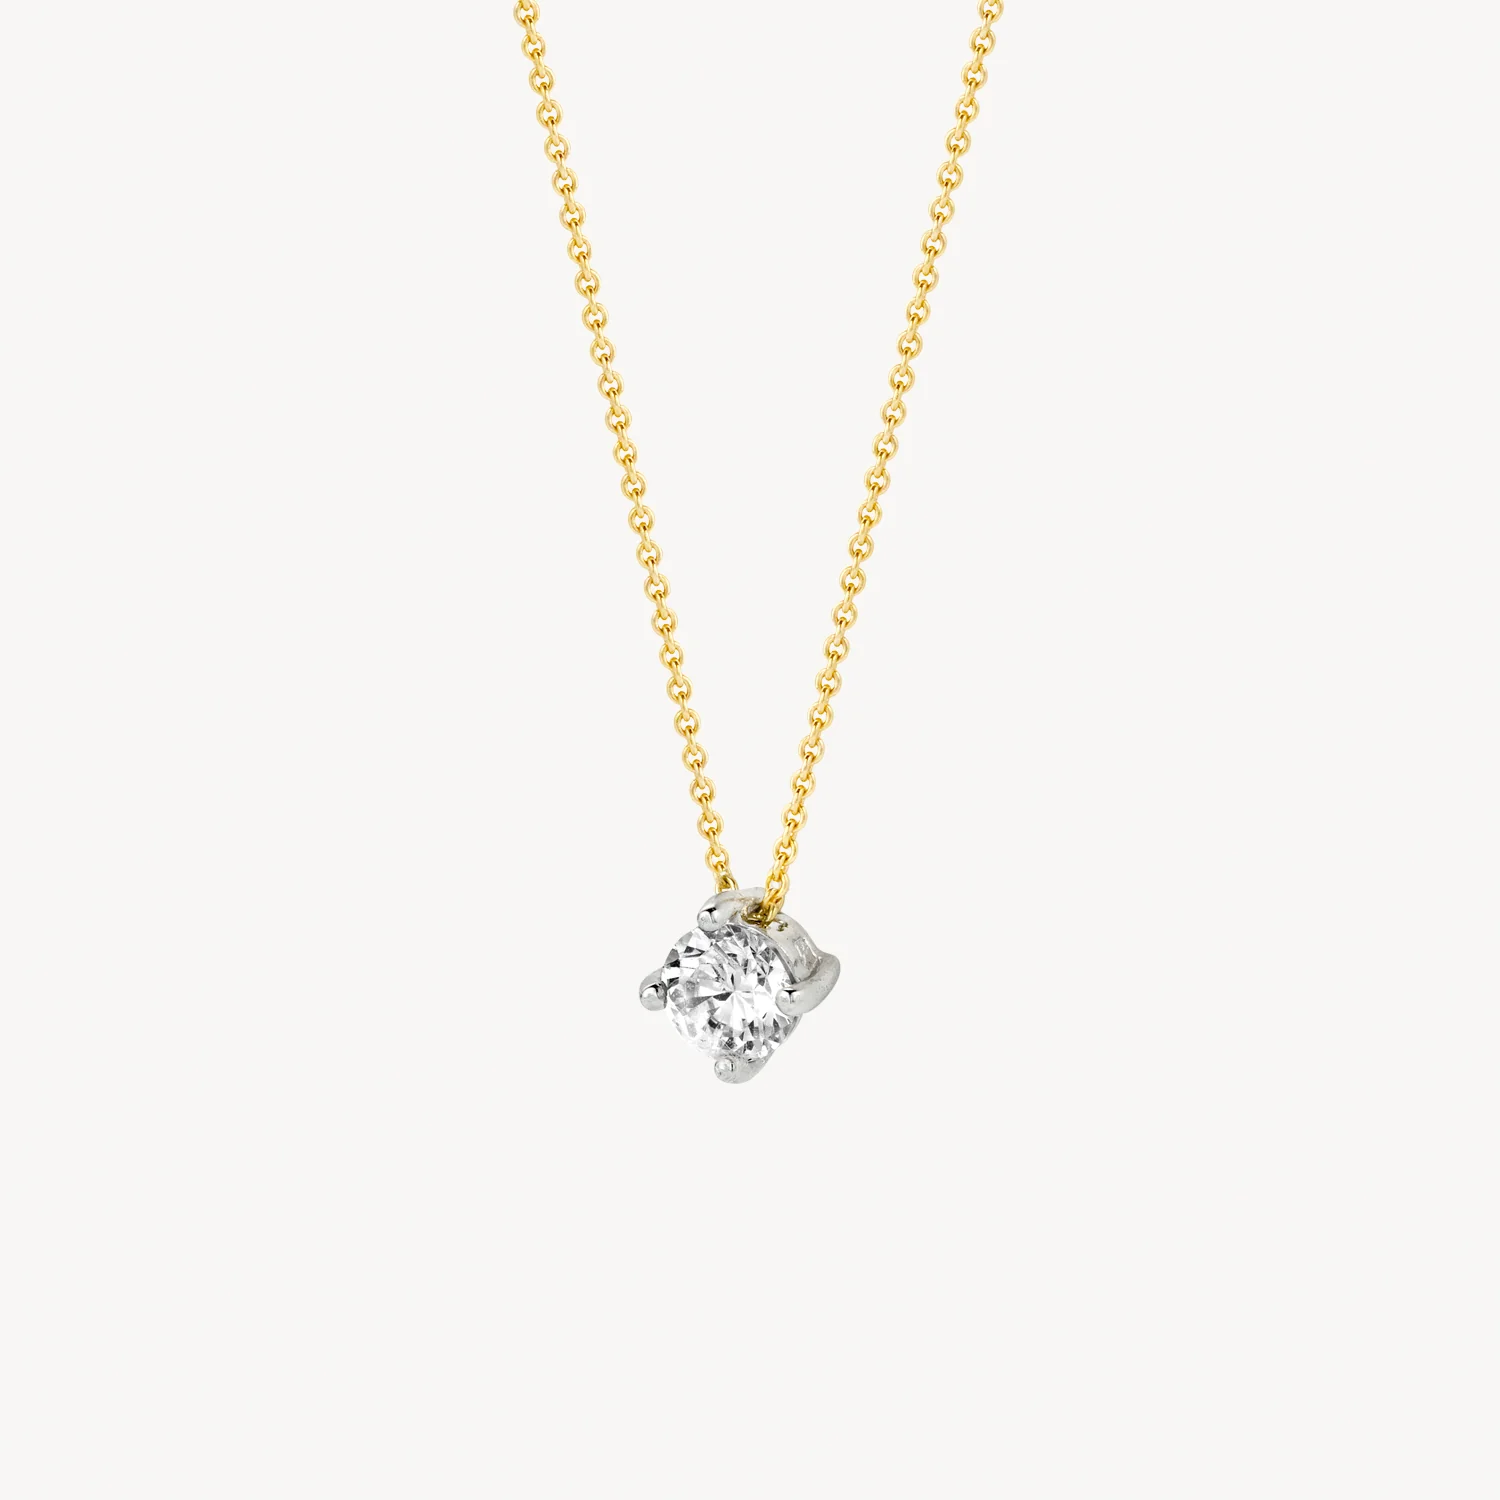 Blush Two-Tone Gold Necklace with CZ Pendant